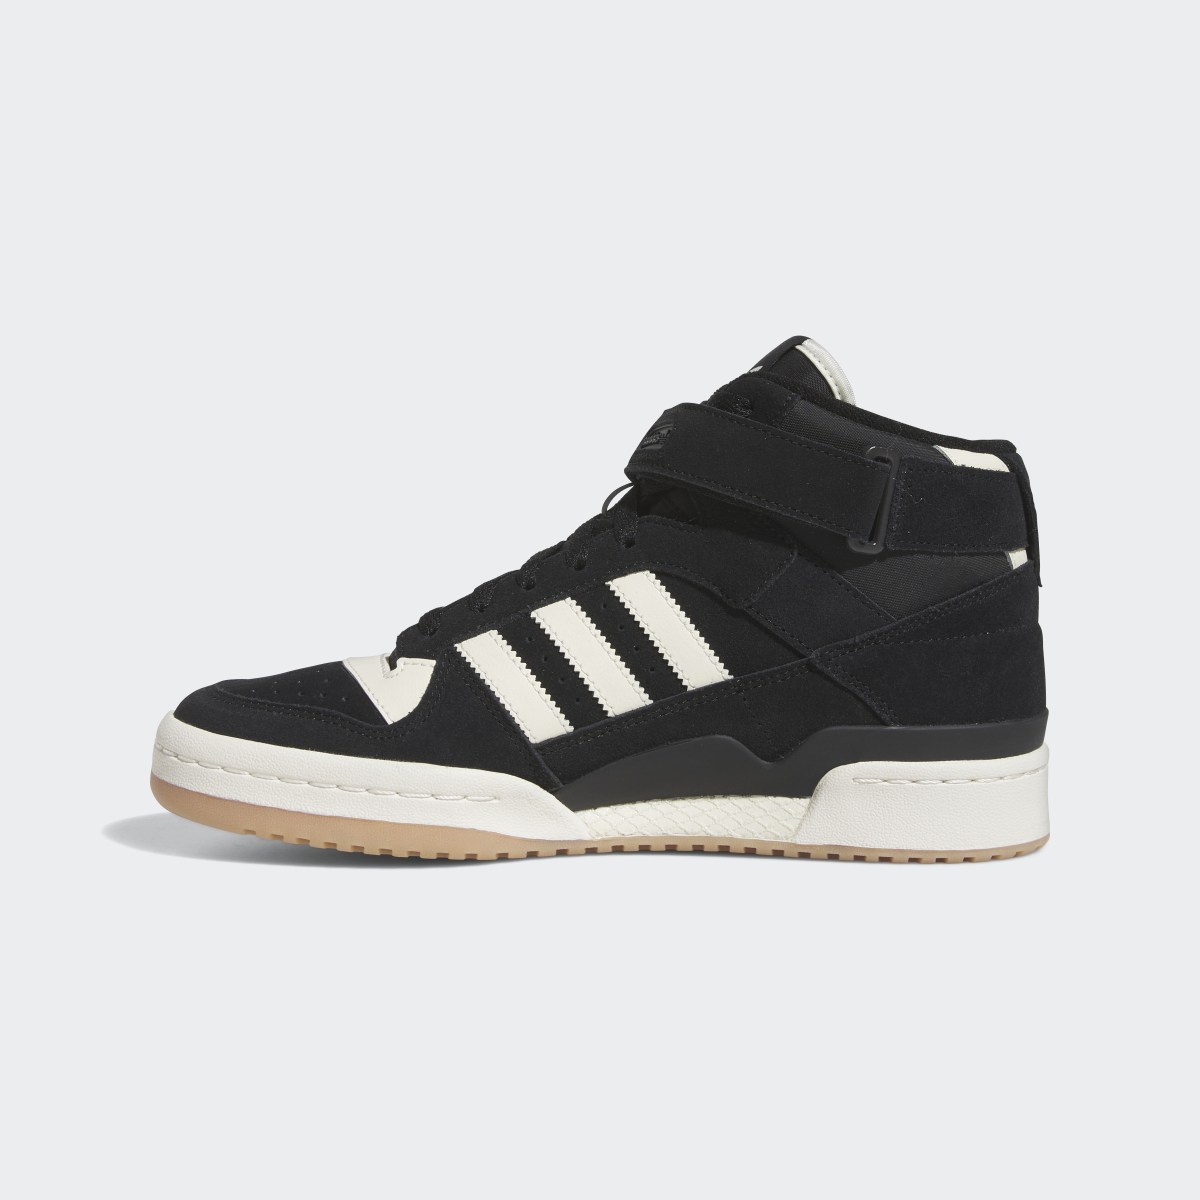 Adidas Forum Mid Shoes. 7